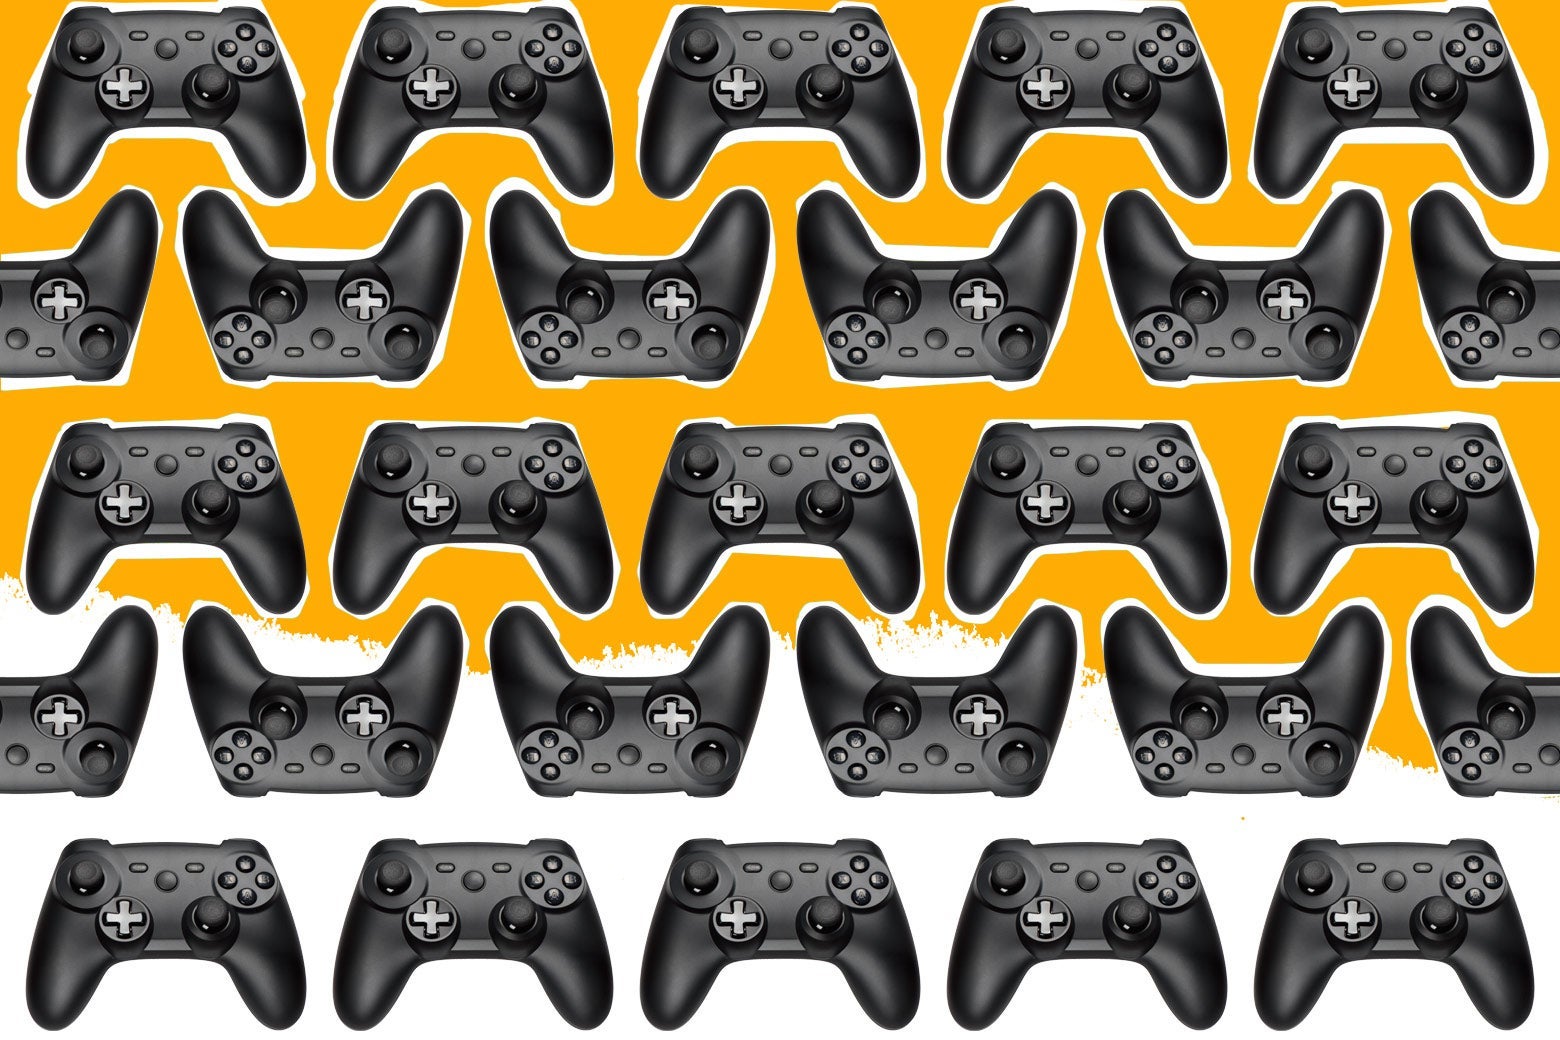 Collage of video game controllers